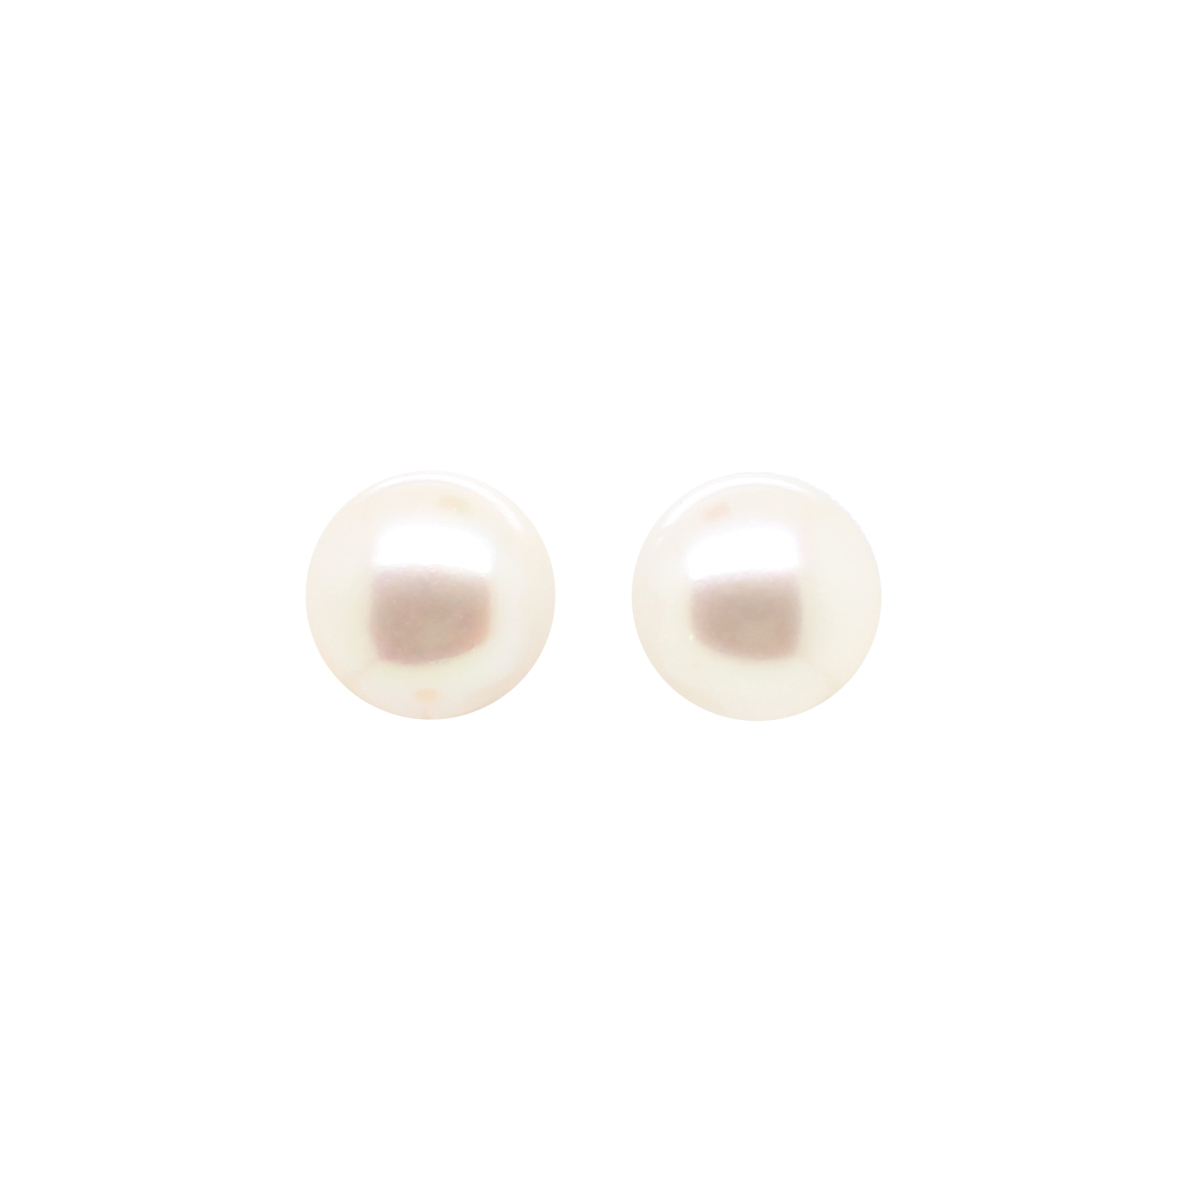 14 Karat White Gold Freshwater Cultured Pearl Earrings  Each Earring Contains One Pearl Measuring 7-8mm  AAA Quality